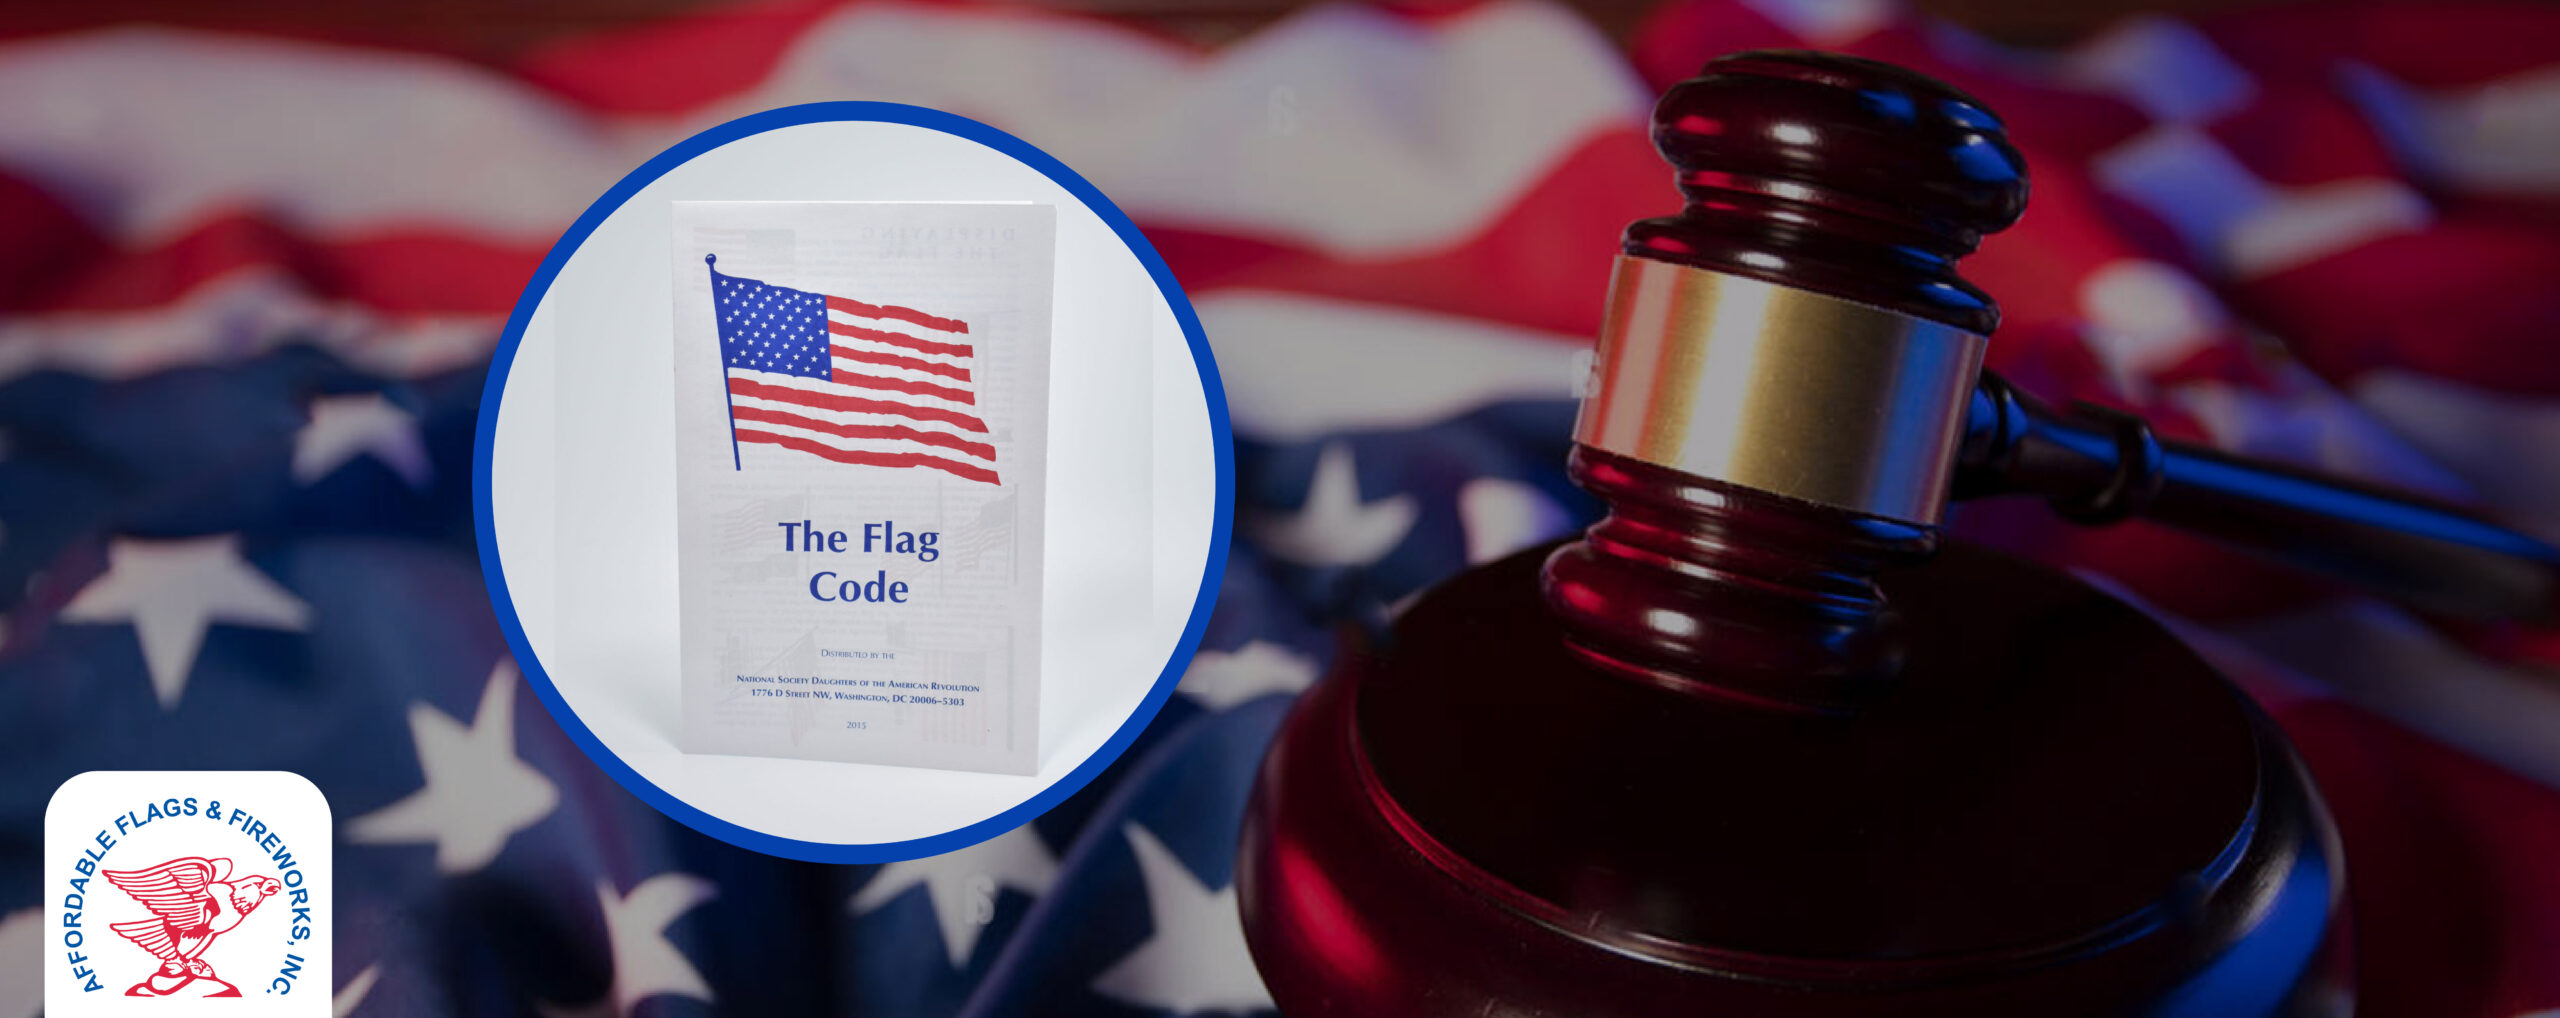 a-flag-code-booklet-of-the-American-flag